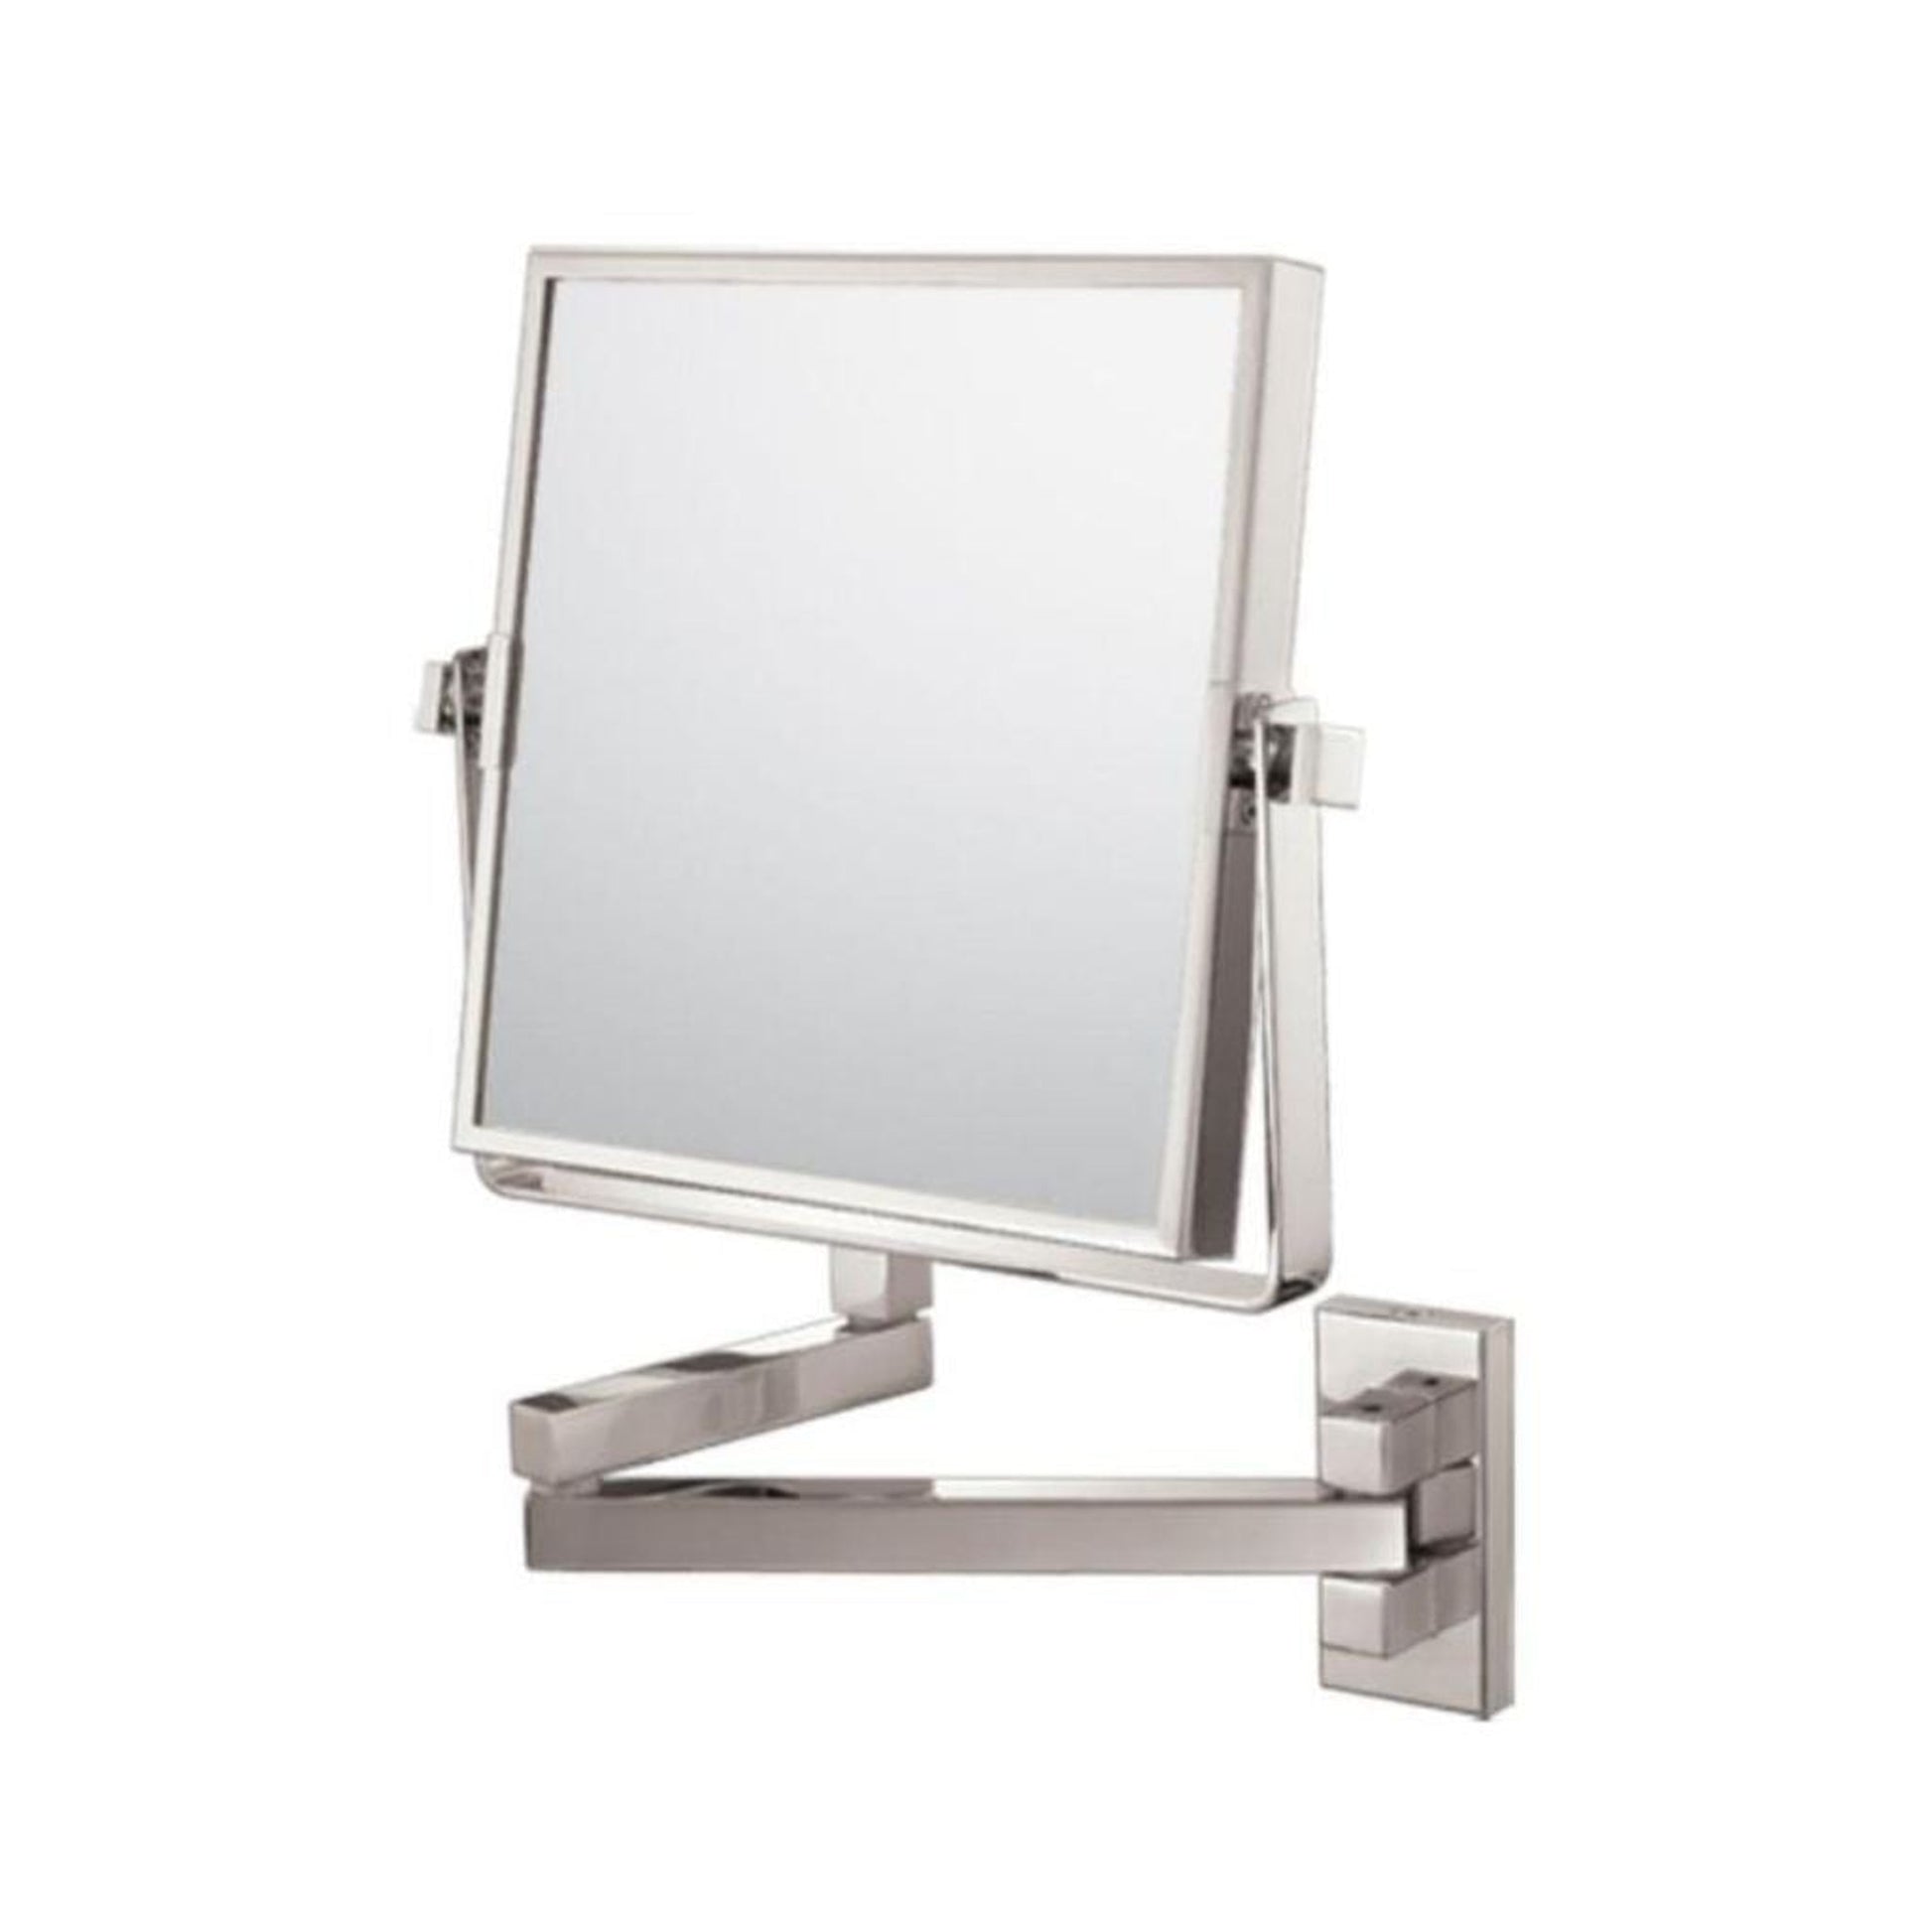 Aptations Mirror Image 9" x 12" Brushed Nickel Wall-Mounted Square 1X/3X Magnified Makeup Mirror